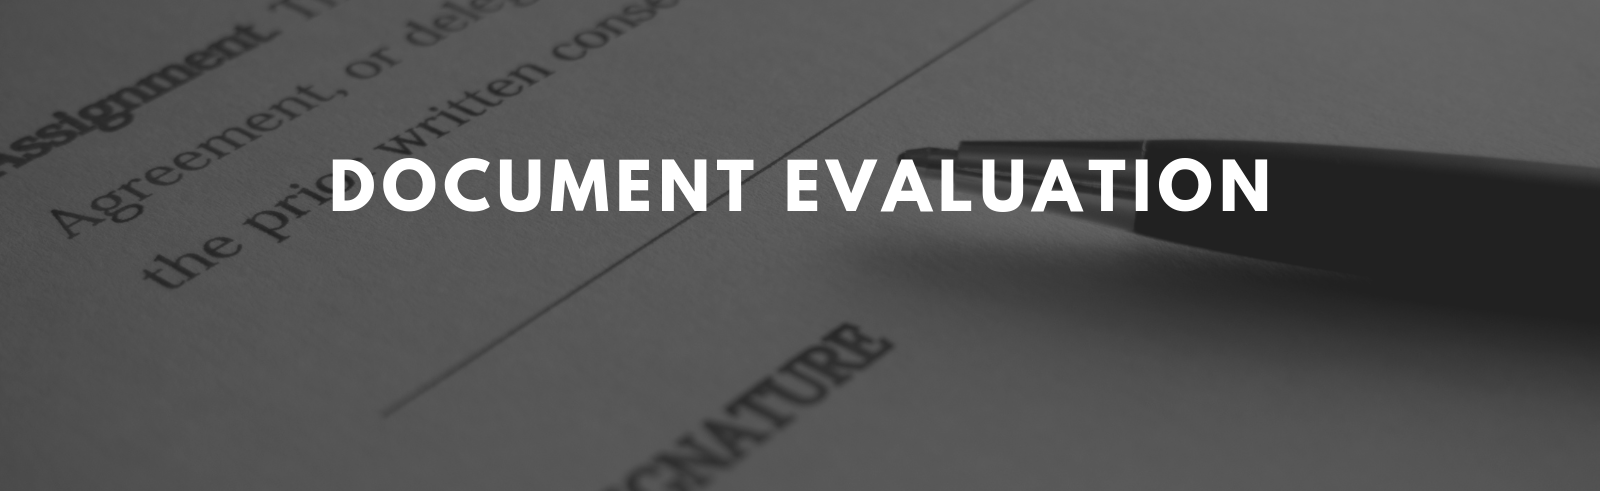 Document Evaluation Page Banner